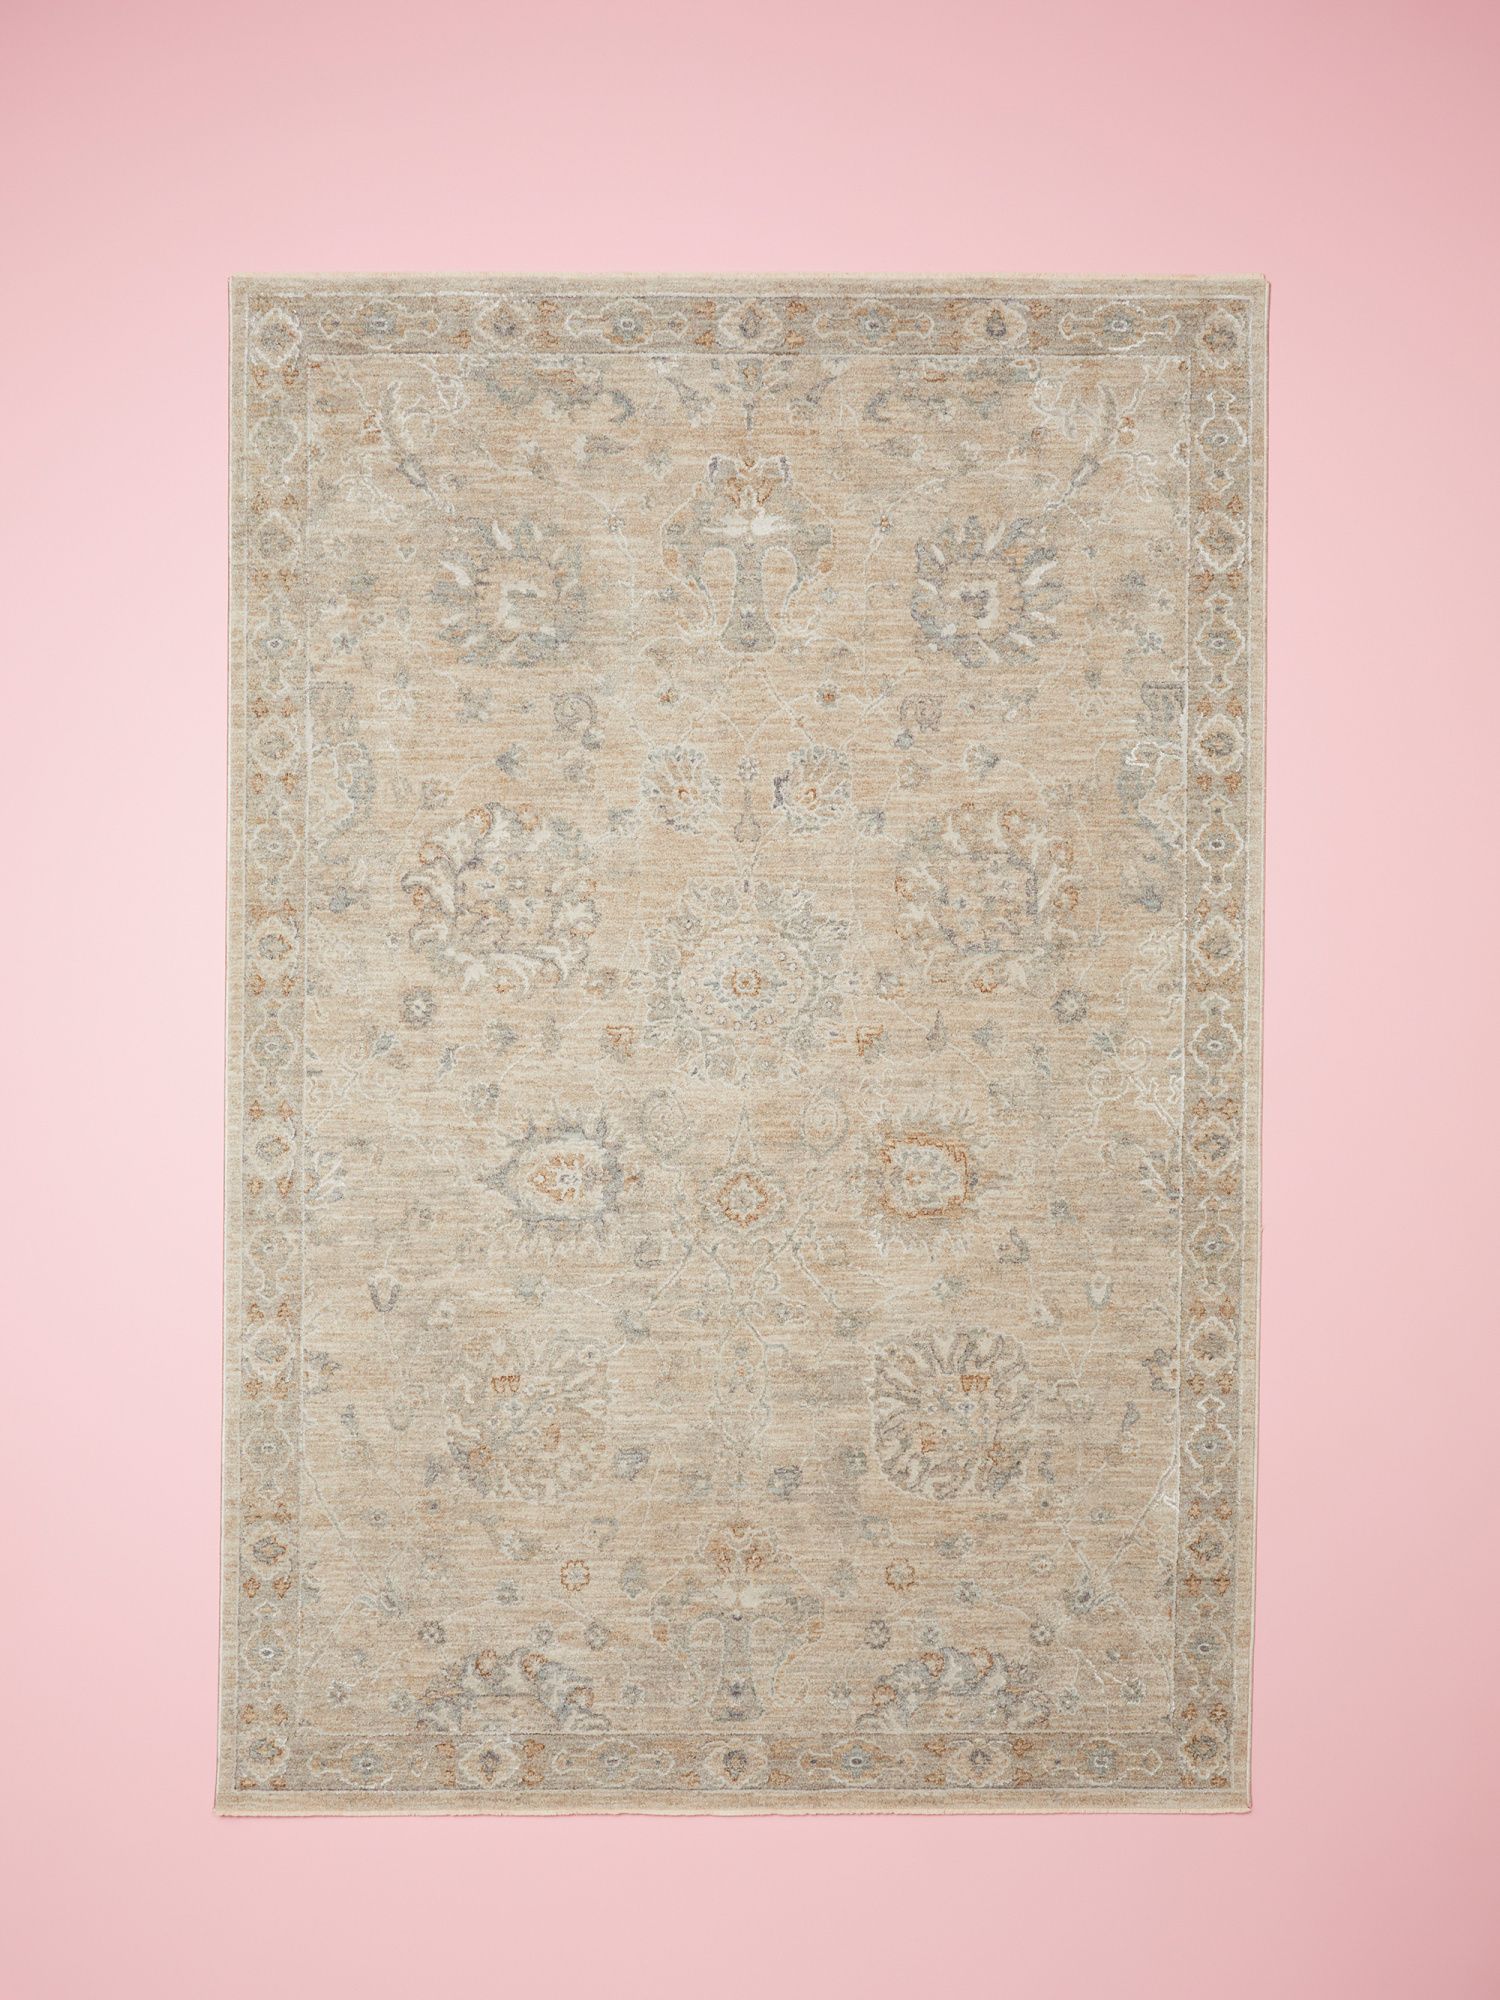 Made In Turkey 5x7 Traditional Area Rug | HomeGoods